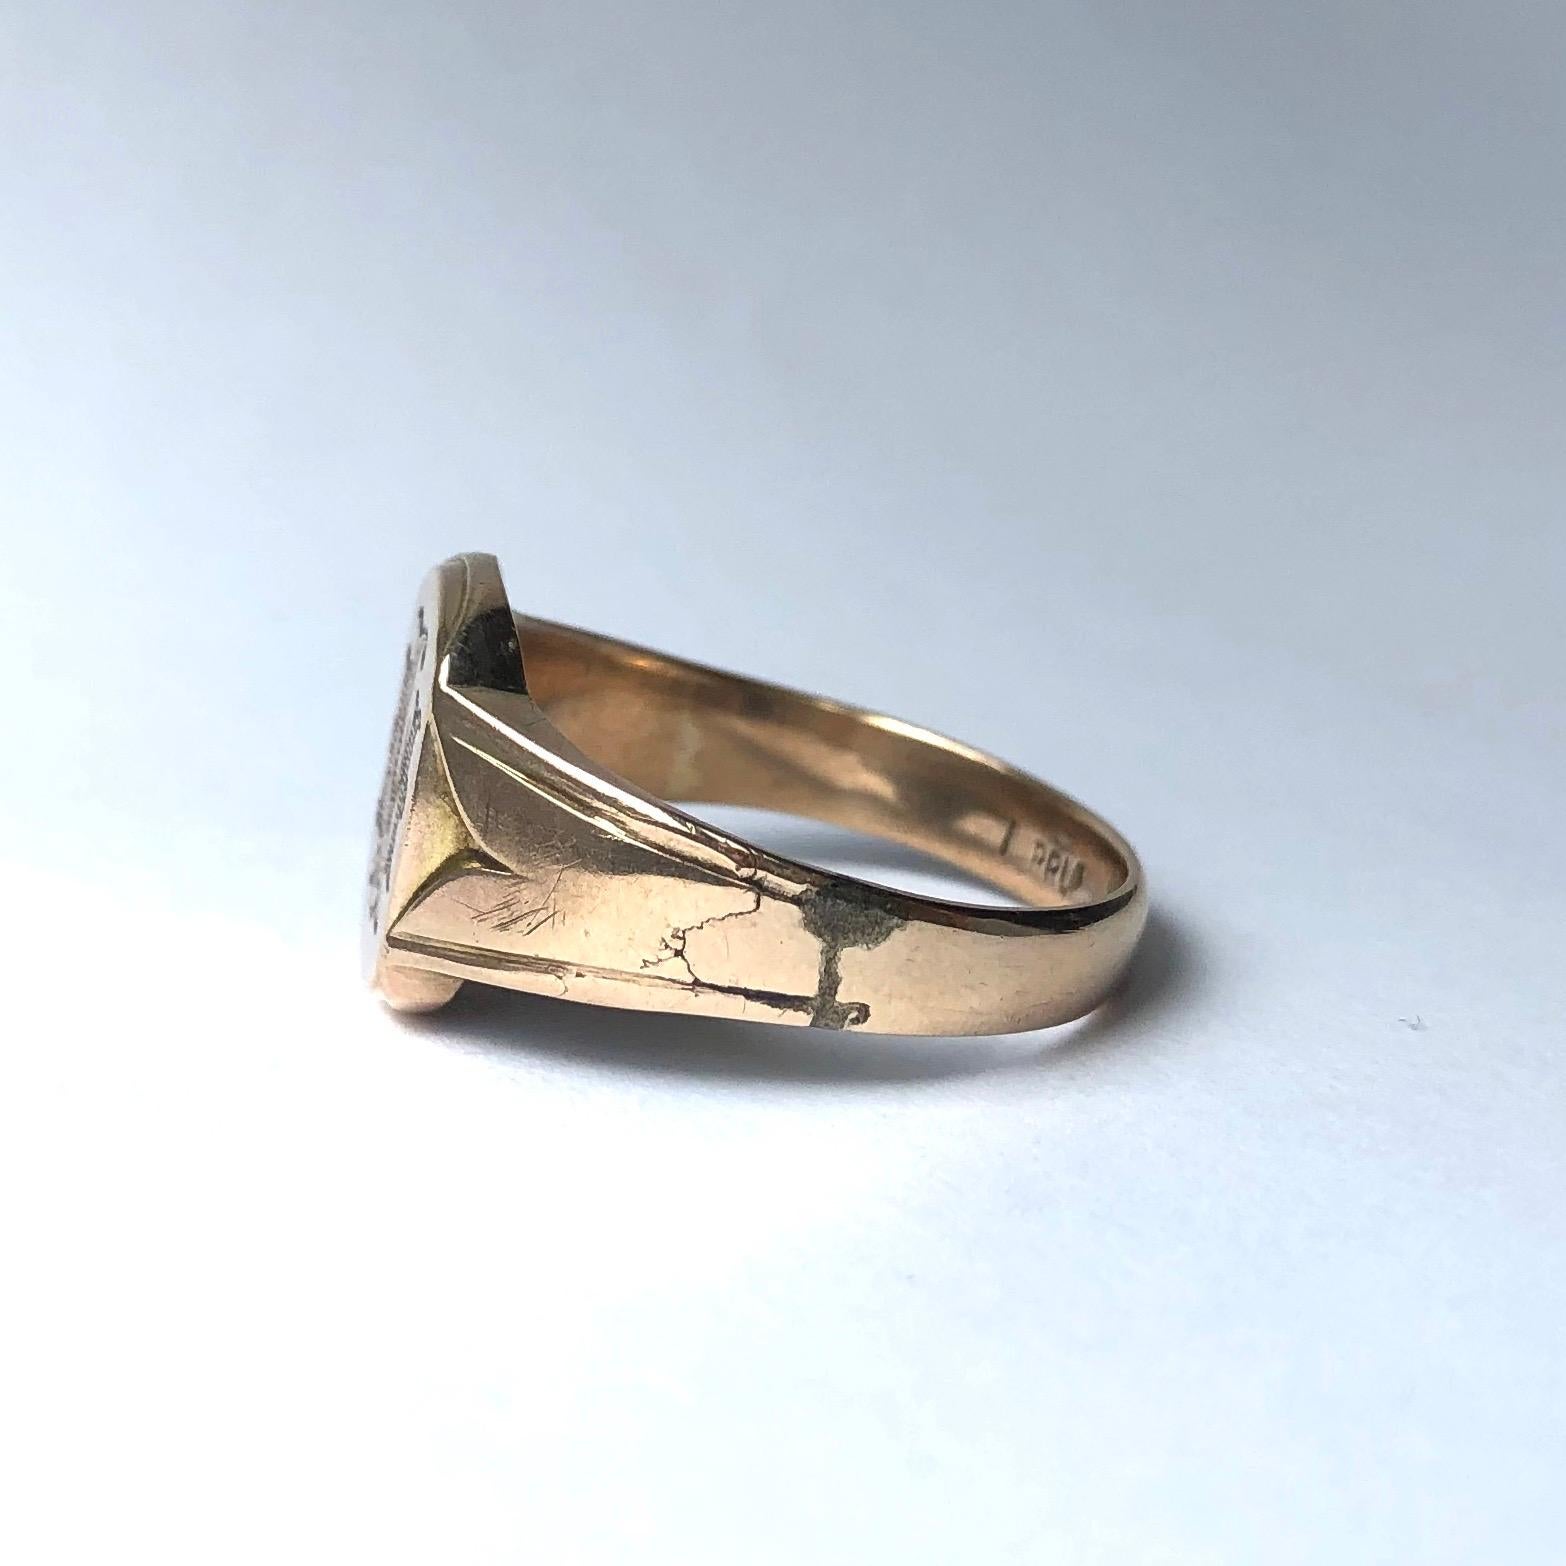 This signet ring is modelled in 9ct gold and has the initials L.M or M.L engraved on the front. Made in Chester, England. 

Ring Size: T or 9 1/2 
Face Dimensions: 9x13mm 

Weight: 6.03g